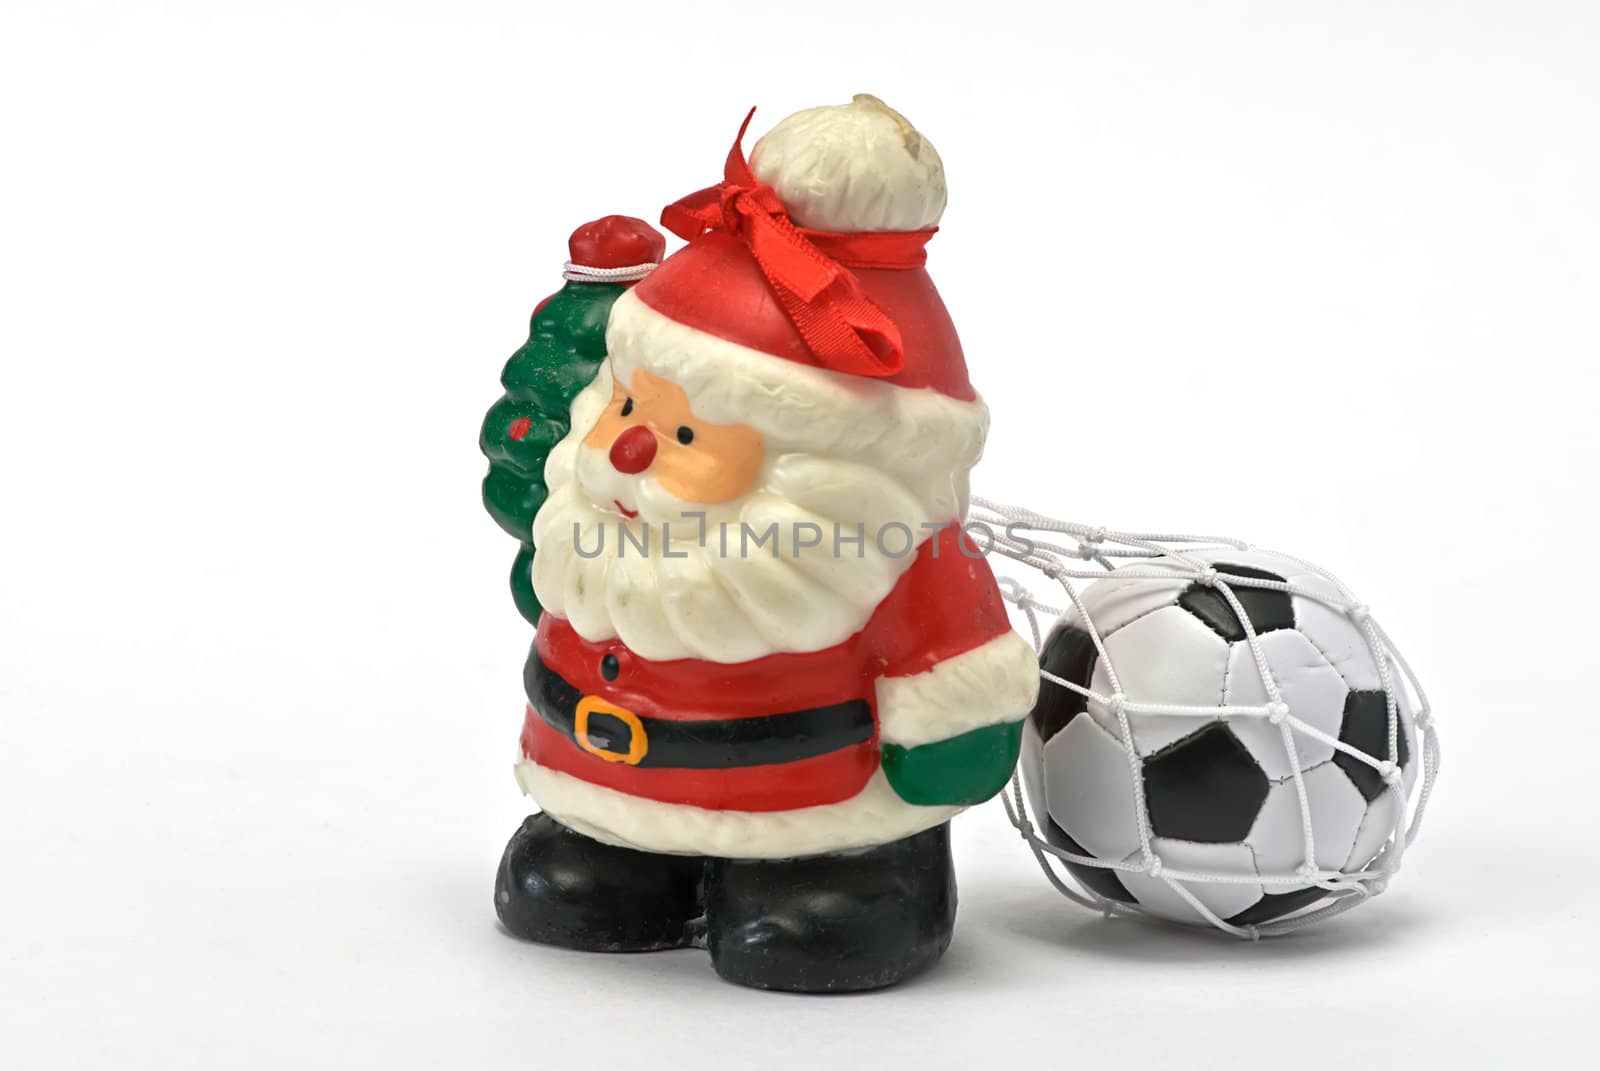 Santa Claus whit football by vikinded